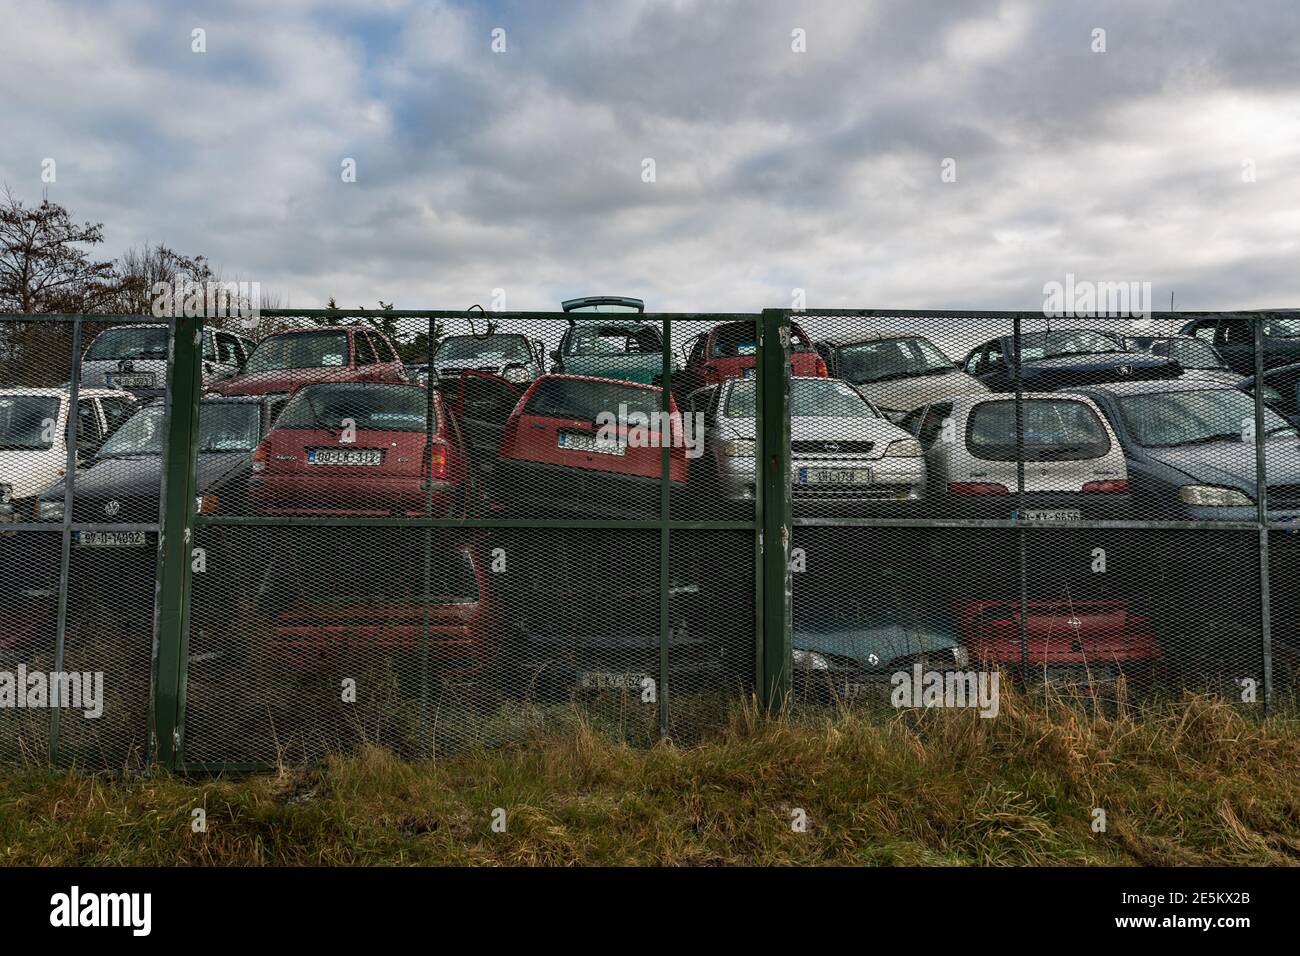 Listowel, Ireland - 7th January 2021: Pile of discarded old cars in a   junkyard. Stock Photo